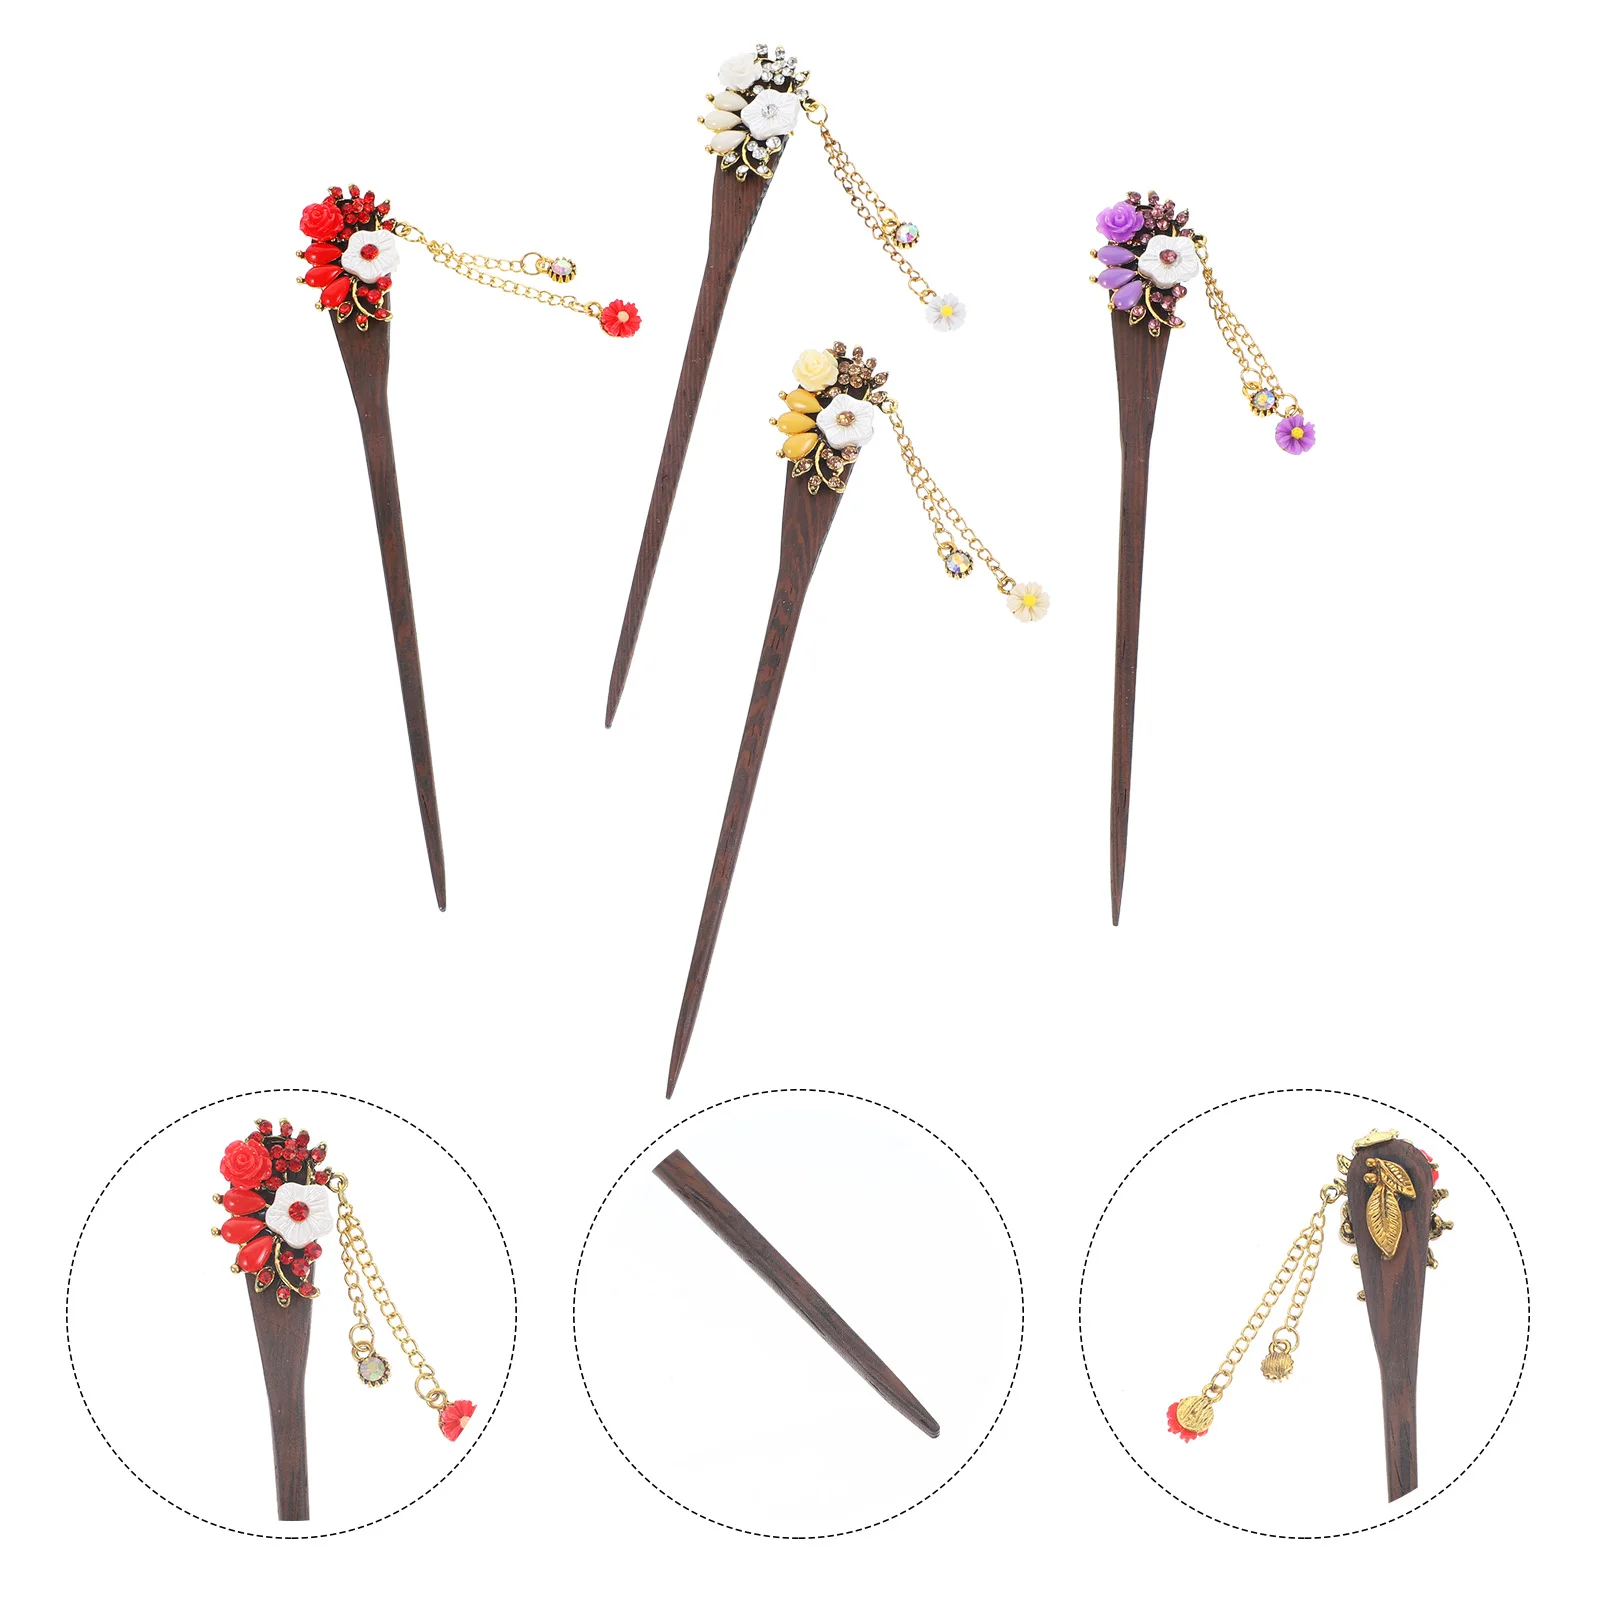 

Frcolor 1PC Stylish Wooden Hair Stick Vintage Bronze Hair Pin Traditional Flower Hairpin for Women Hair Styling (Blue)